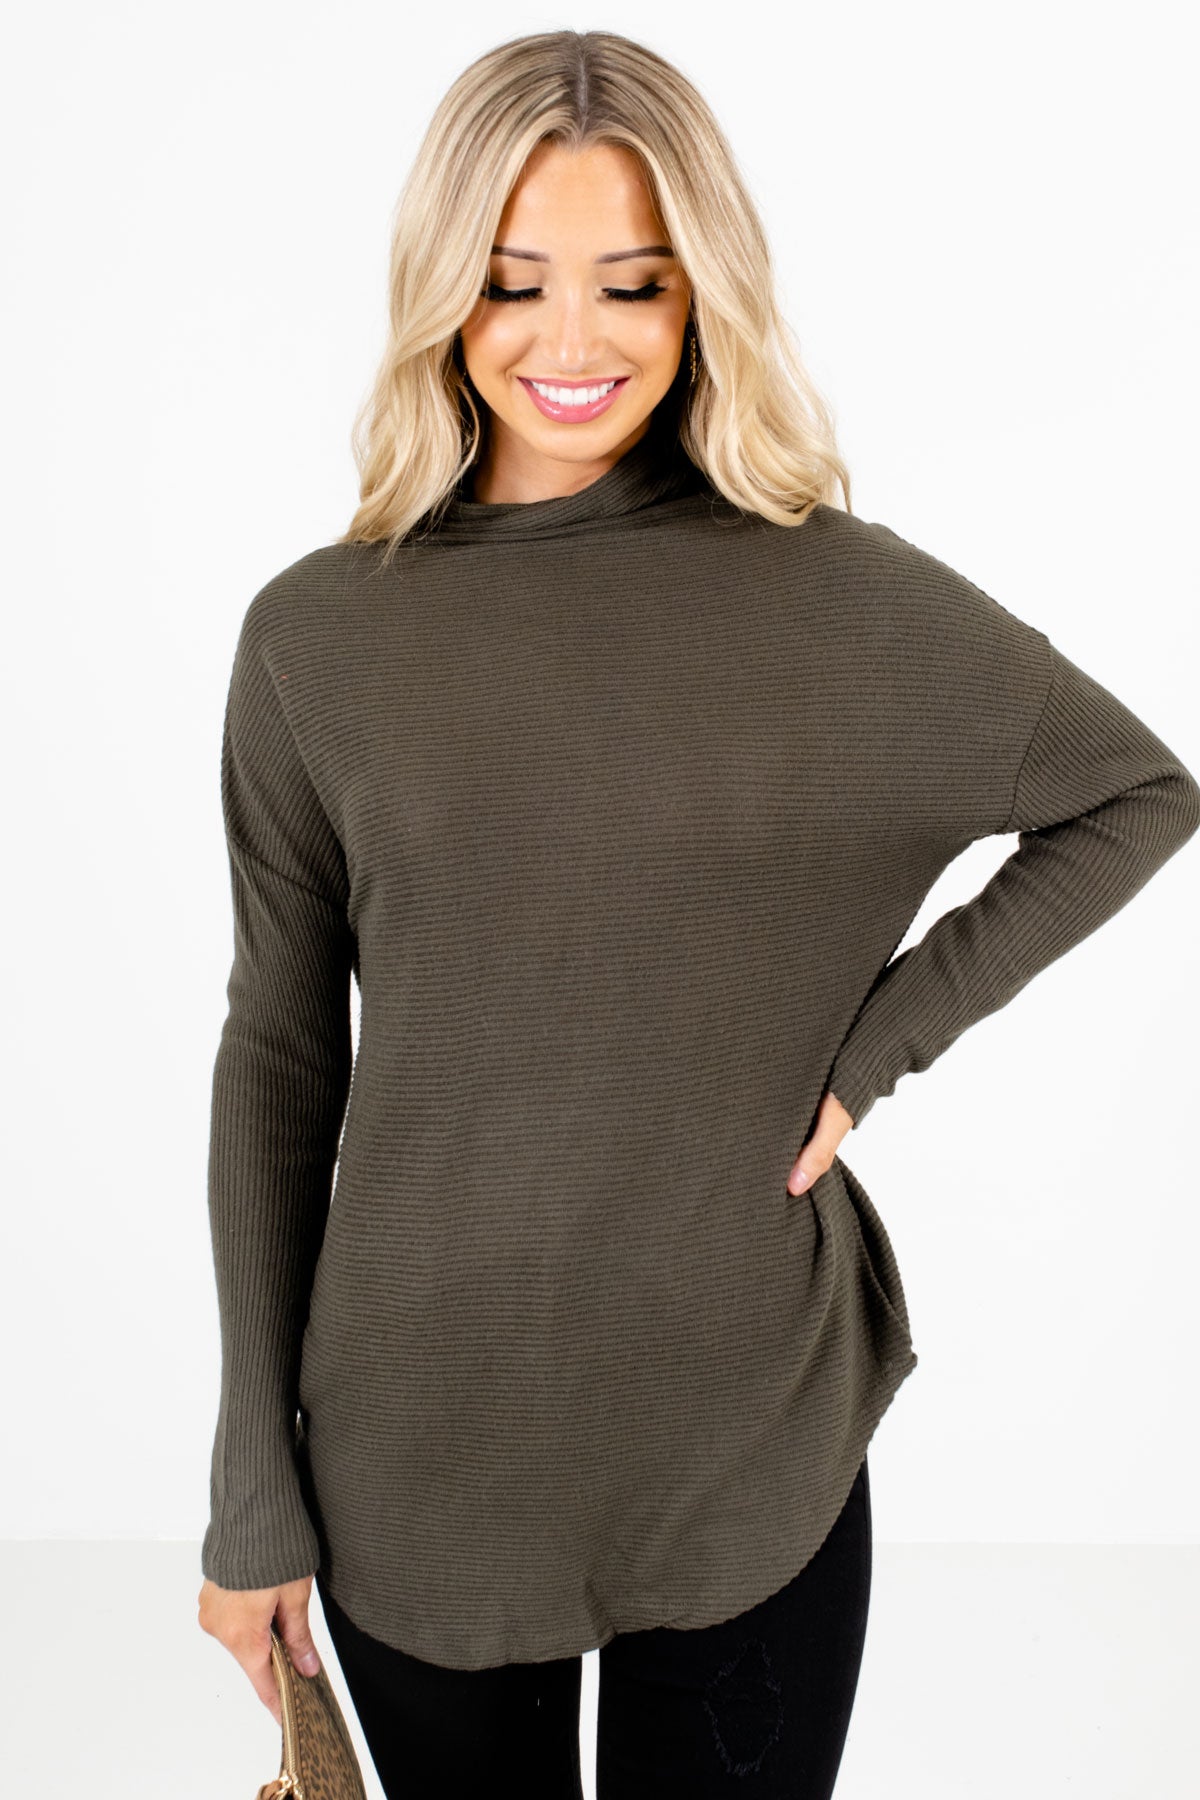 Olive Green Cowl Neck Style Boutique Sweaters for Women